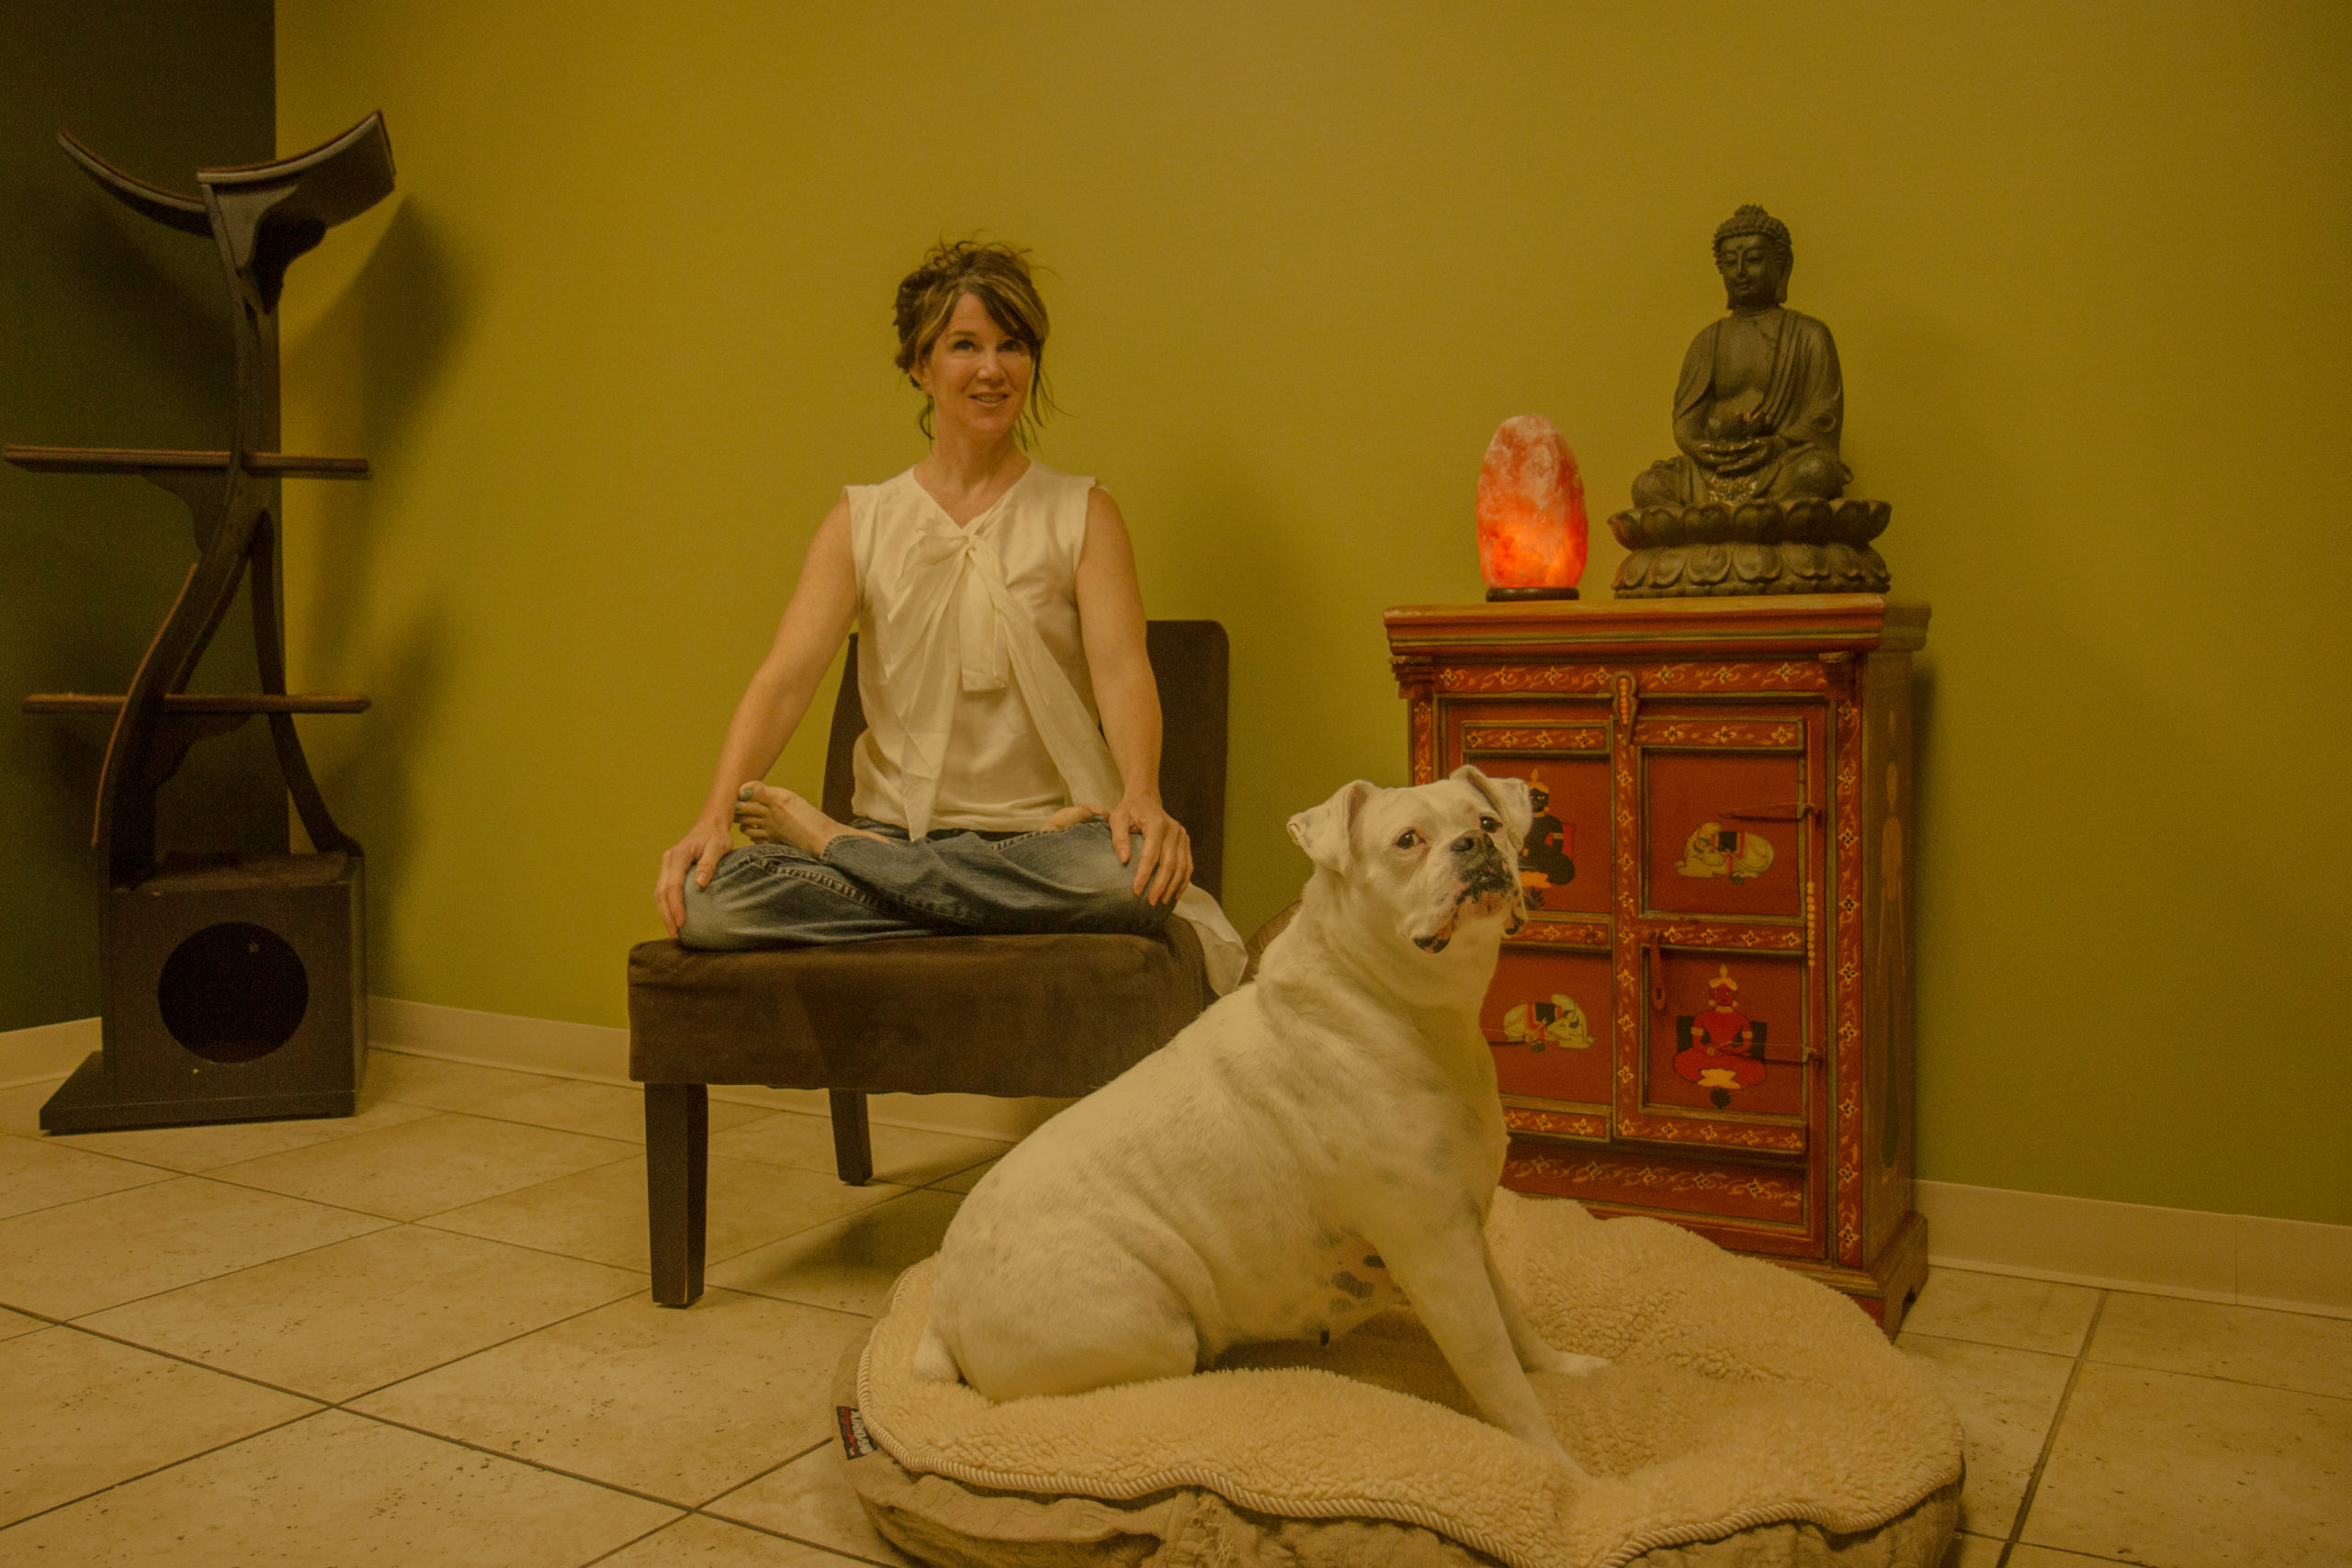 Woman sitting on a chair with a dog in front of her on a pet bed